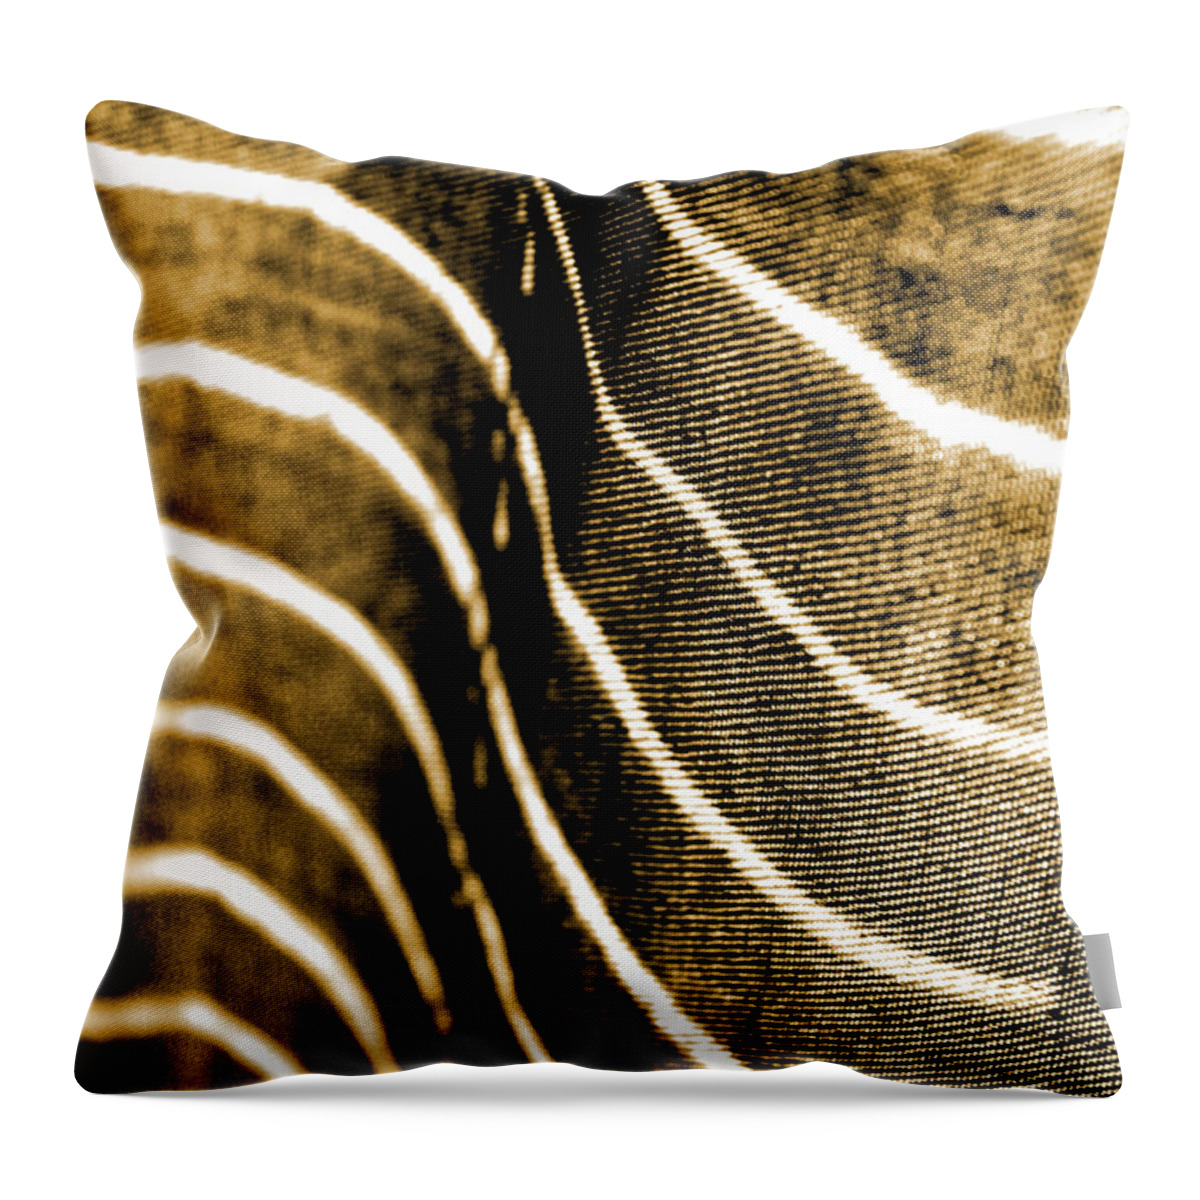 Abstract Throw Pillow featuring the photograph Curves and Folds by Todd Blanchard